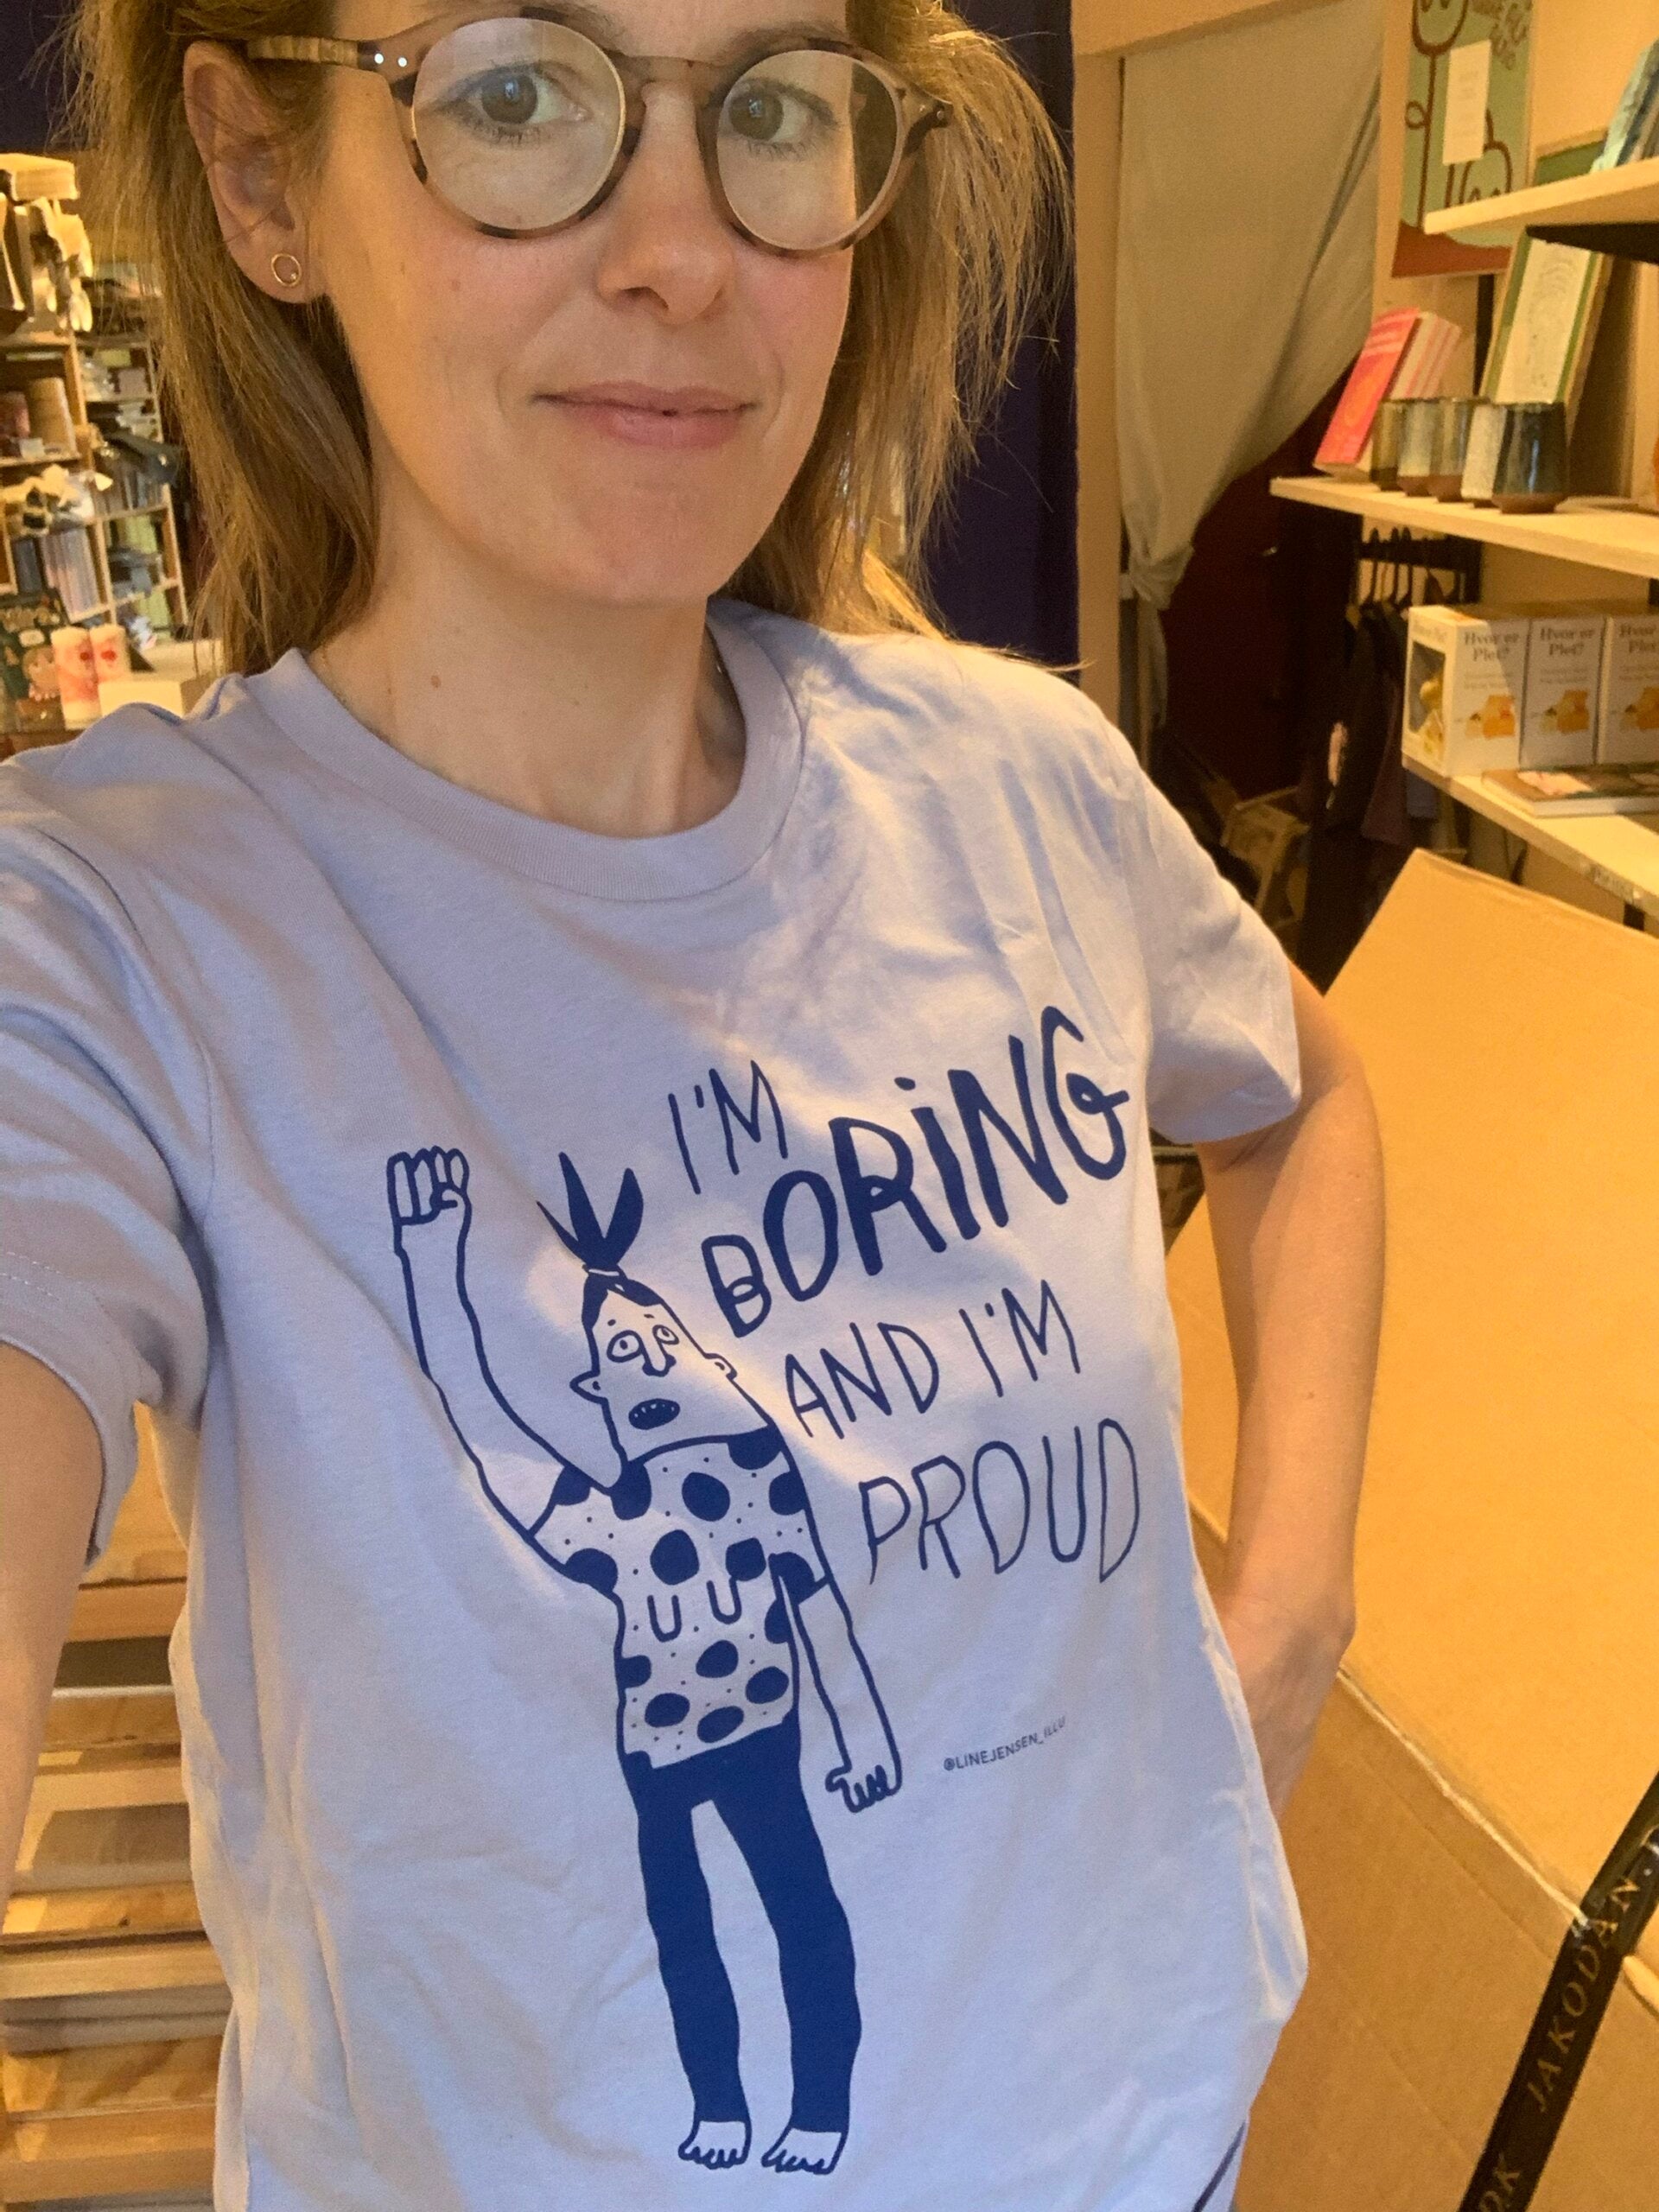 Boring and proud, t-shirt limited edition – Line